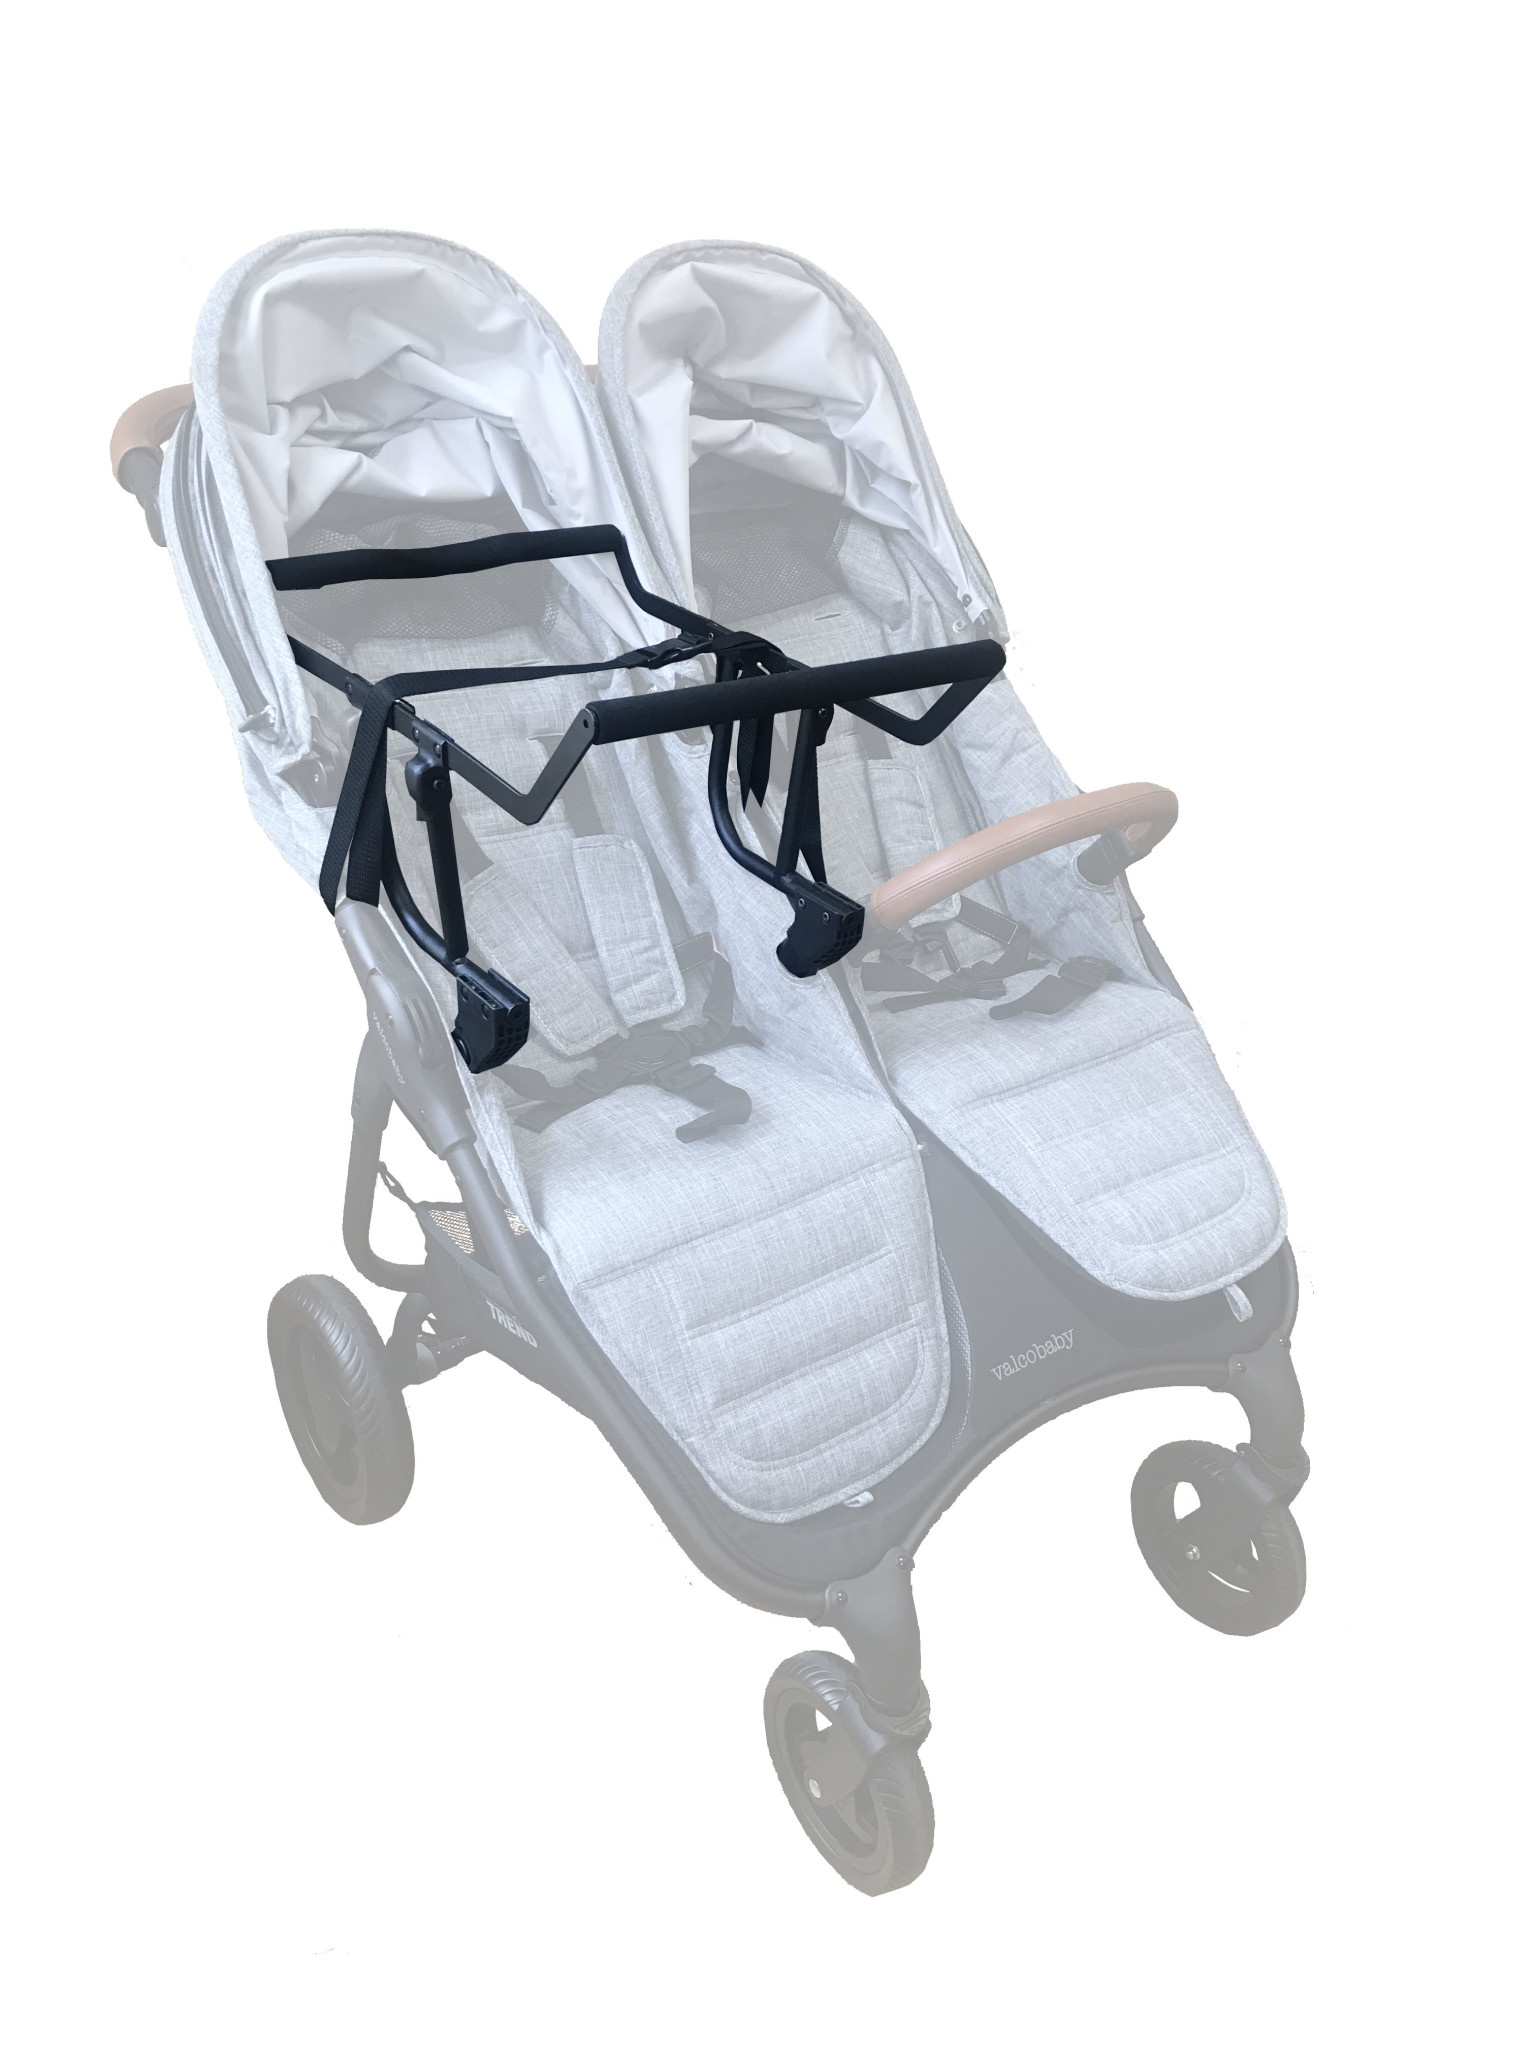 valco baby snap ultra accessories